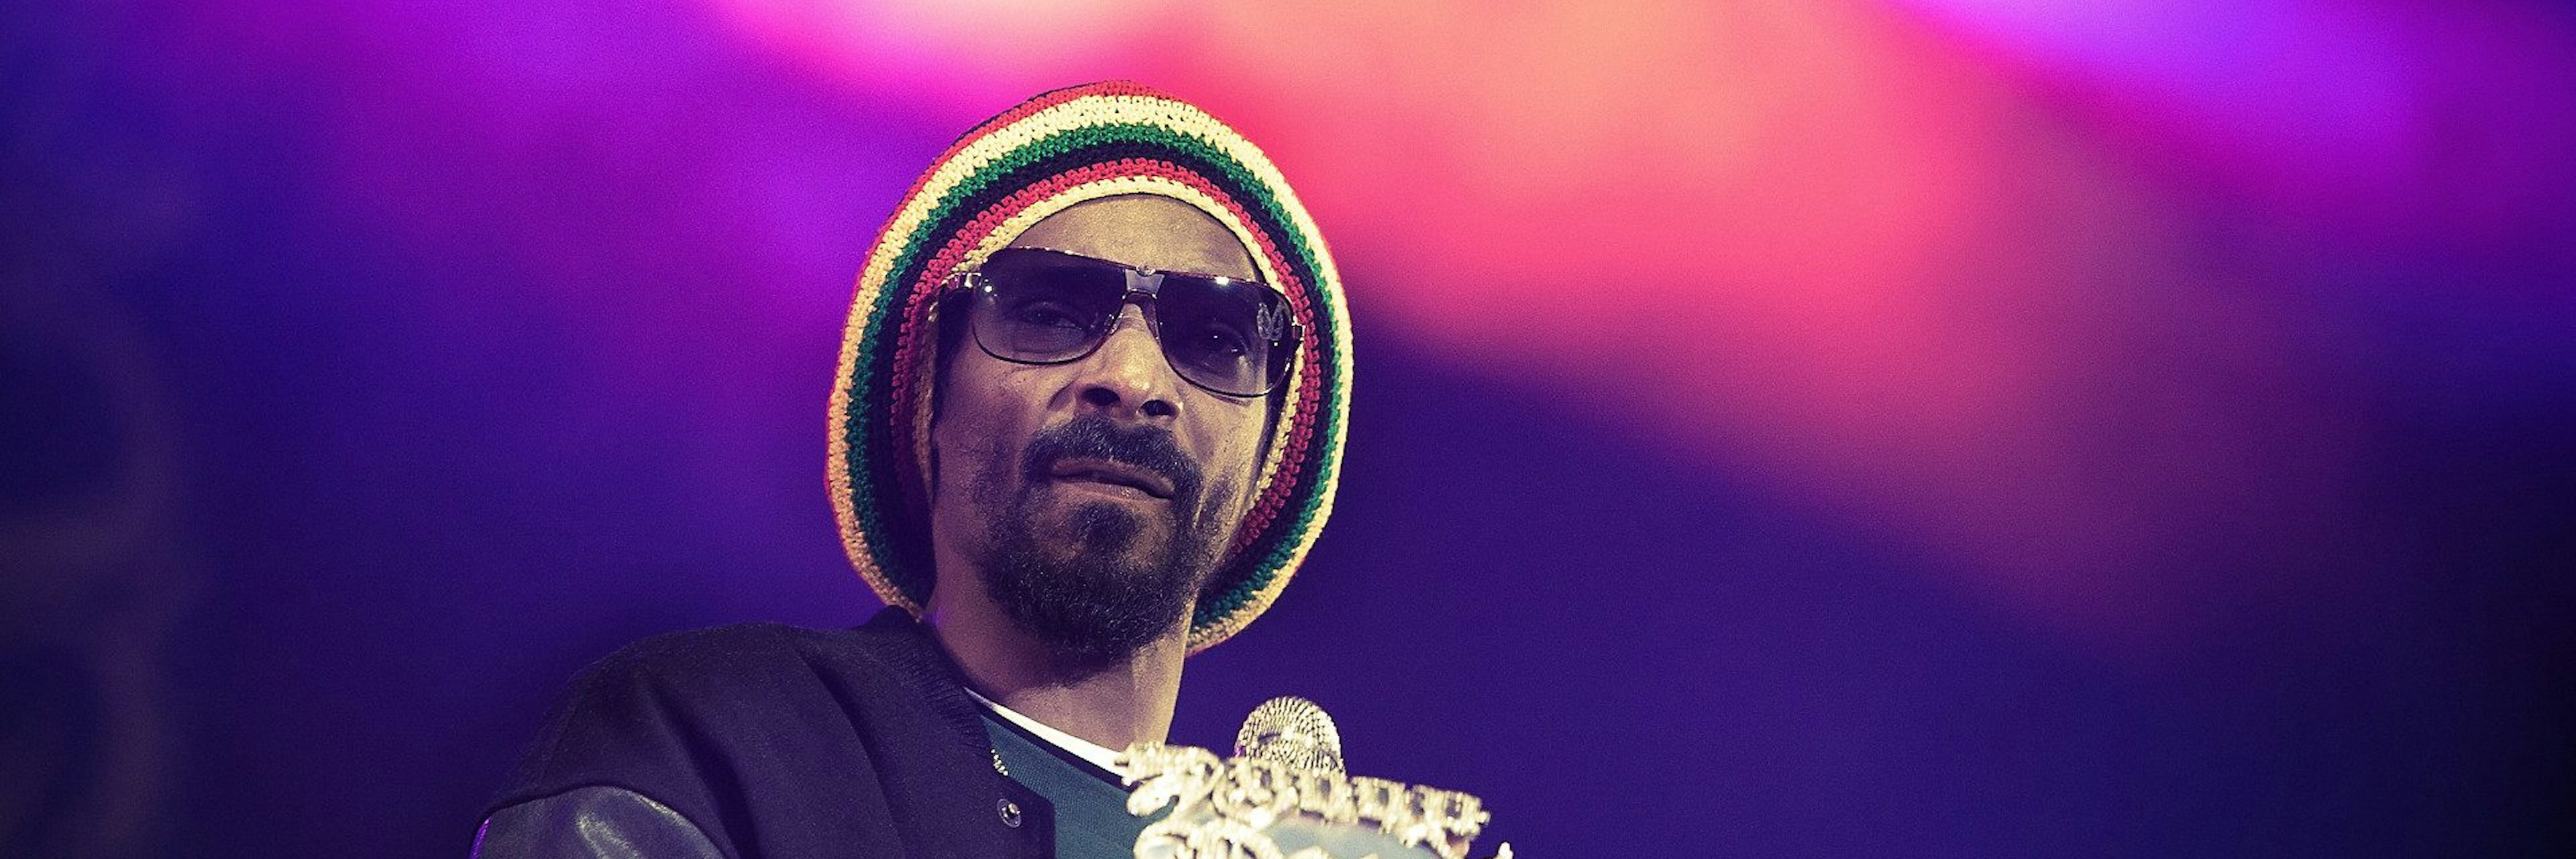 Snoop Dogg's VC firm Casa Verde invests in a variety of cannabis firms